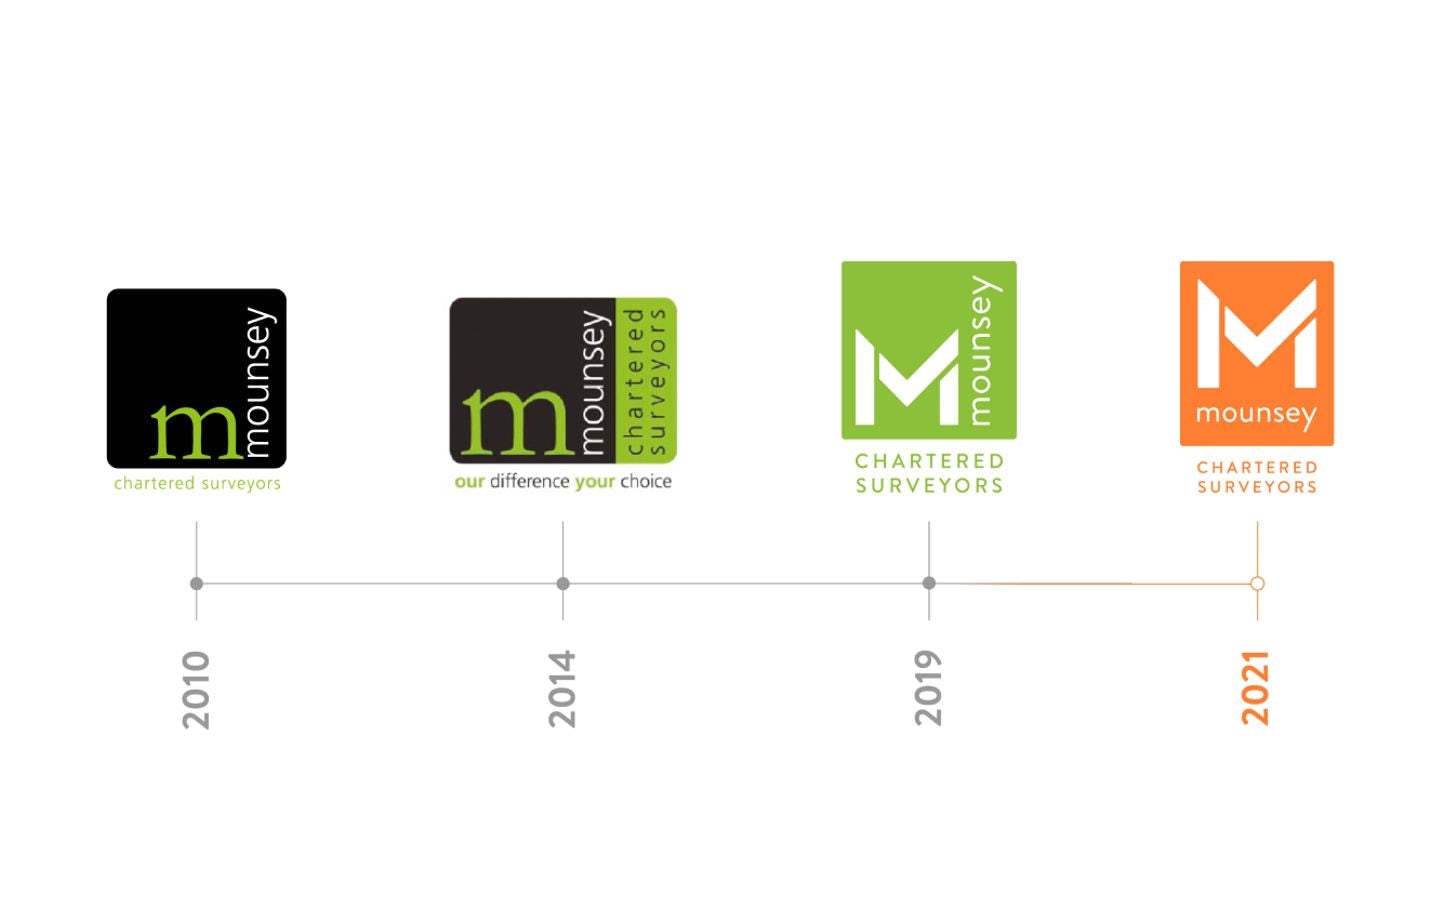 Timeline showing the logo evolution of Mounsey Chartered Surveyors from 2010 to 2021, transitioning from a lime green lowercase 'm' to an orange square with an 'M' resembling a roof structure.